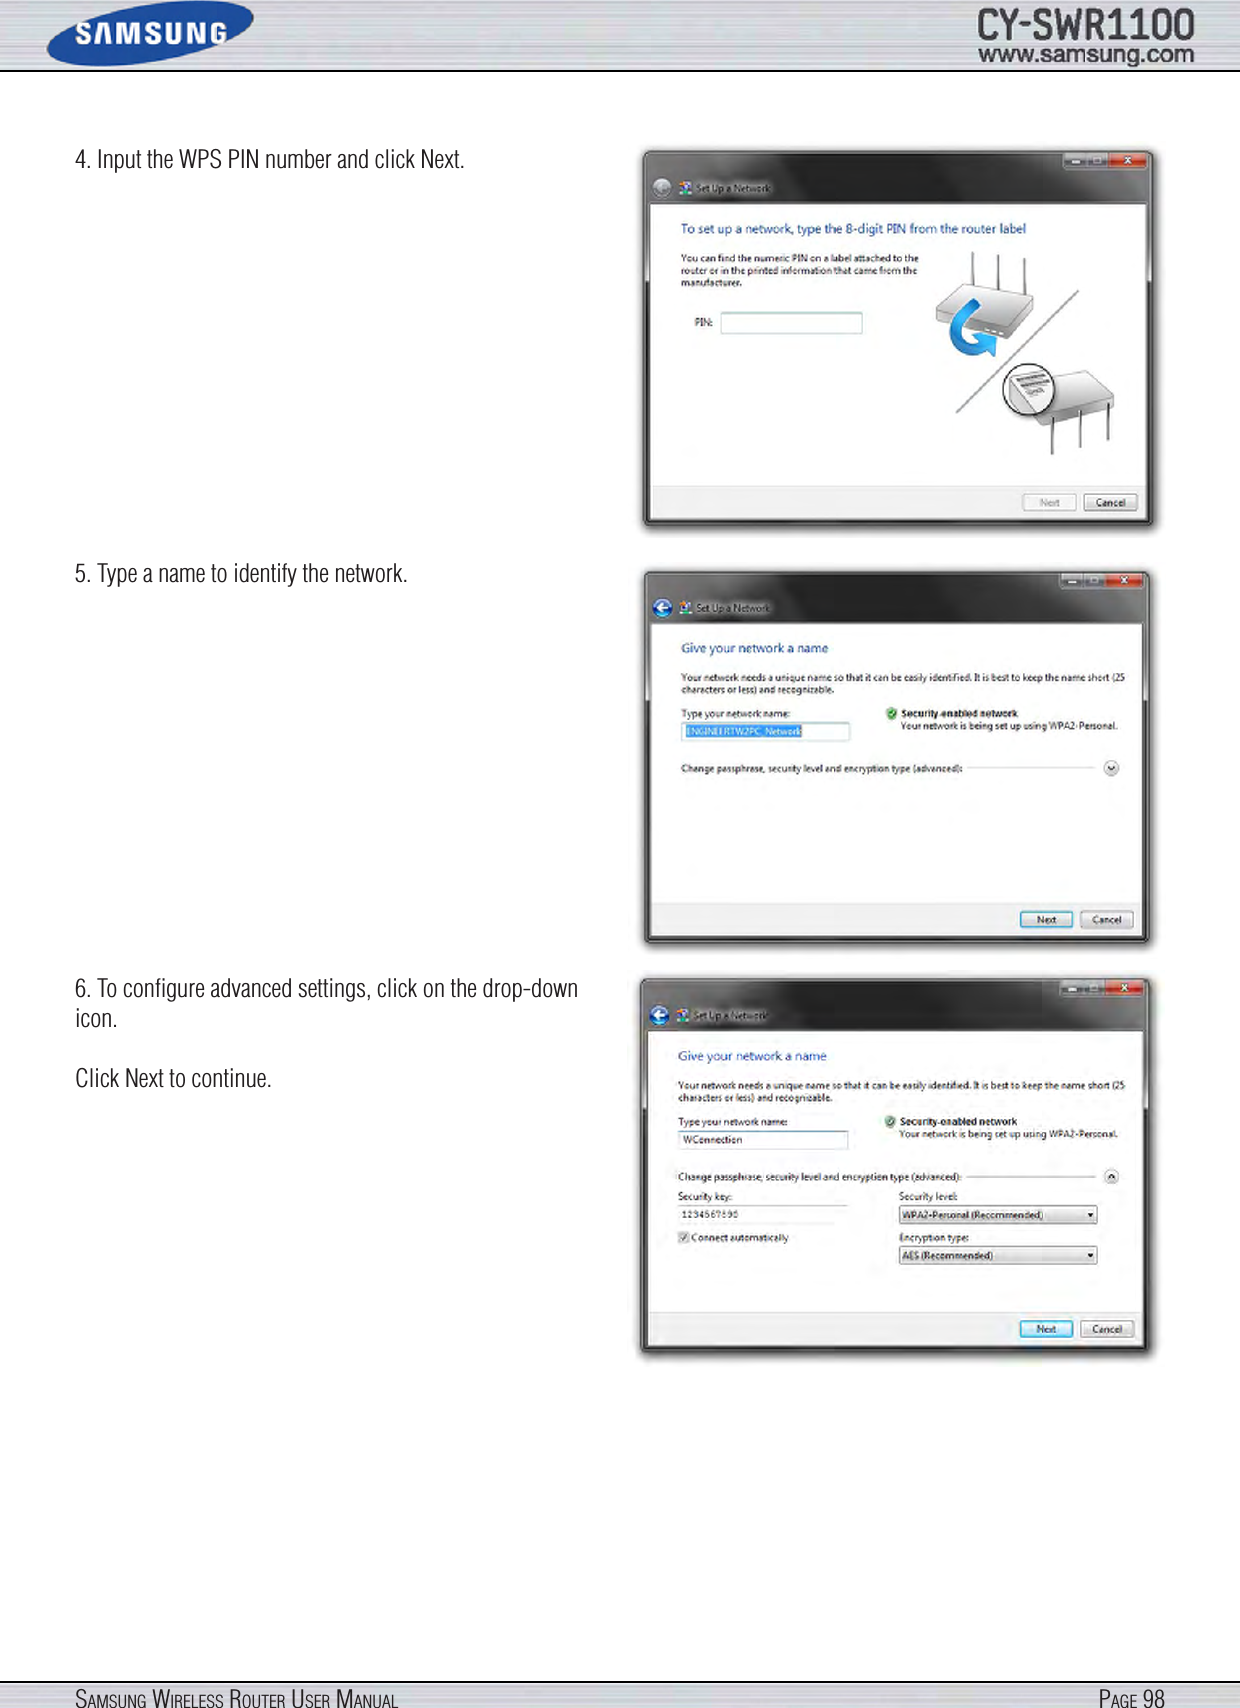 Page 98SamSung WireleSS router uSer manual4. Input the WPS PIN number and click Next.5. Type a name to identify the network.6. To conﬁgure advanced settings, click on the drop-down icon.Click Next to continue.